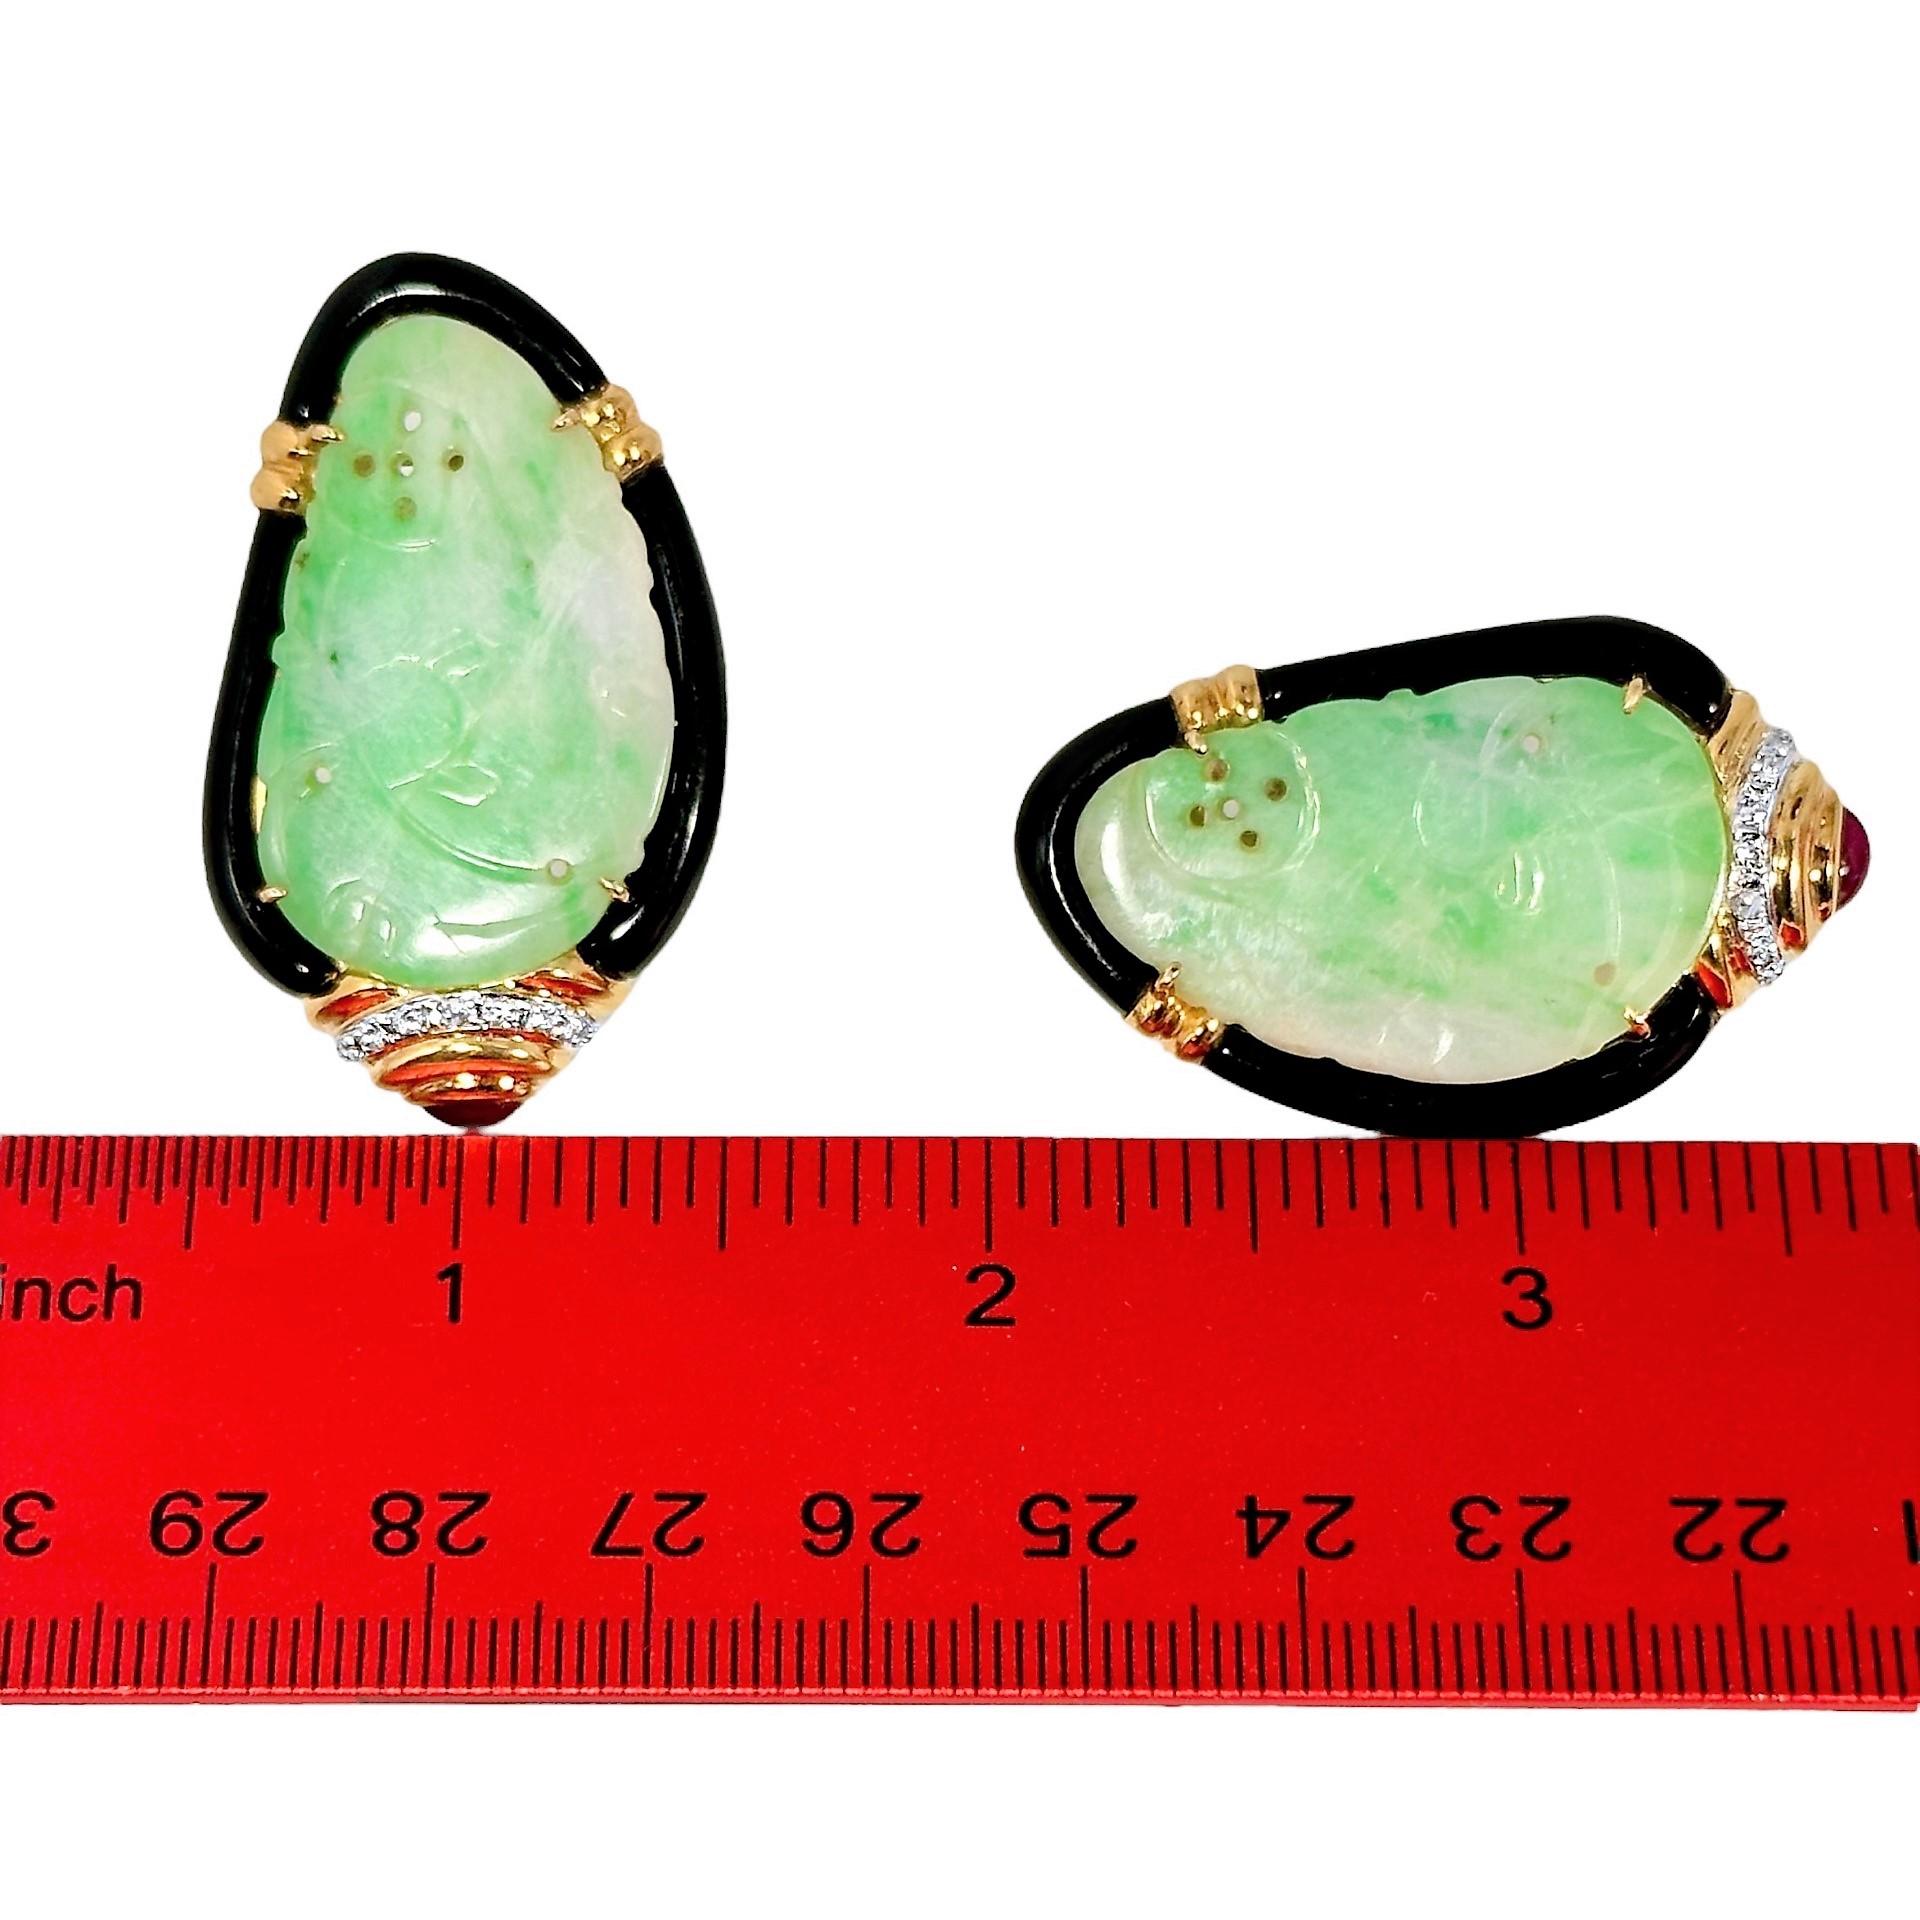 Grand Scale 18k Yellow Gold, Jadeite Jade, Ruby, Diamond and Onyx Earrings In Good Condition For Sale In Palm Beach, FL